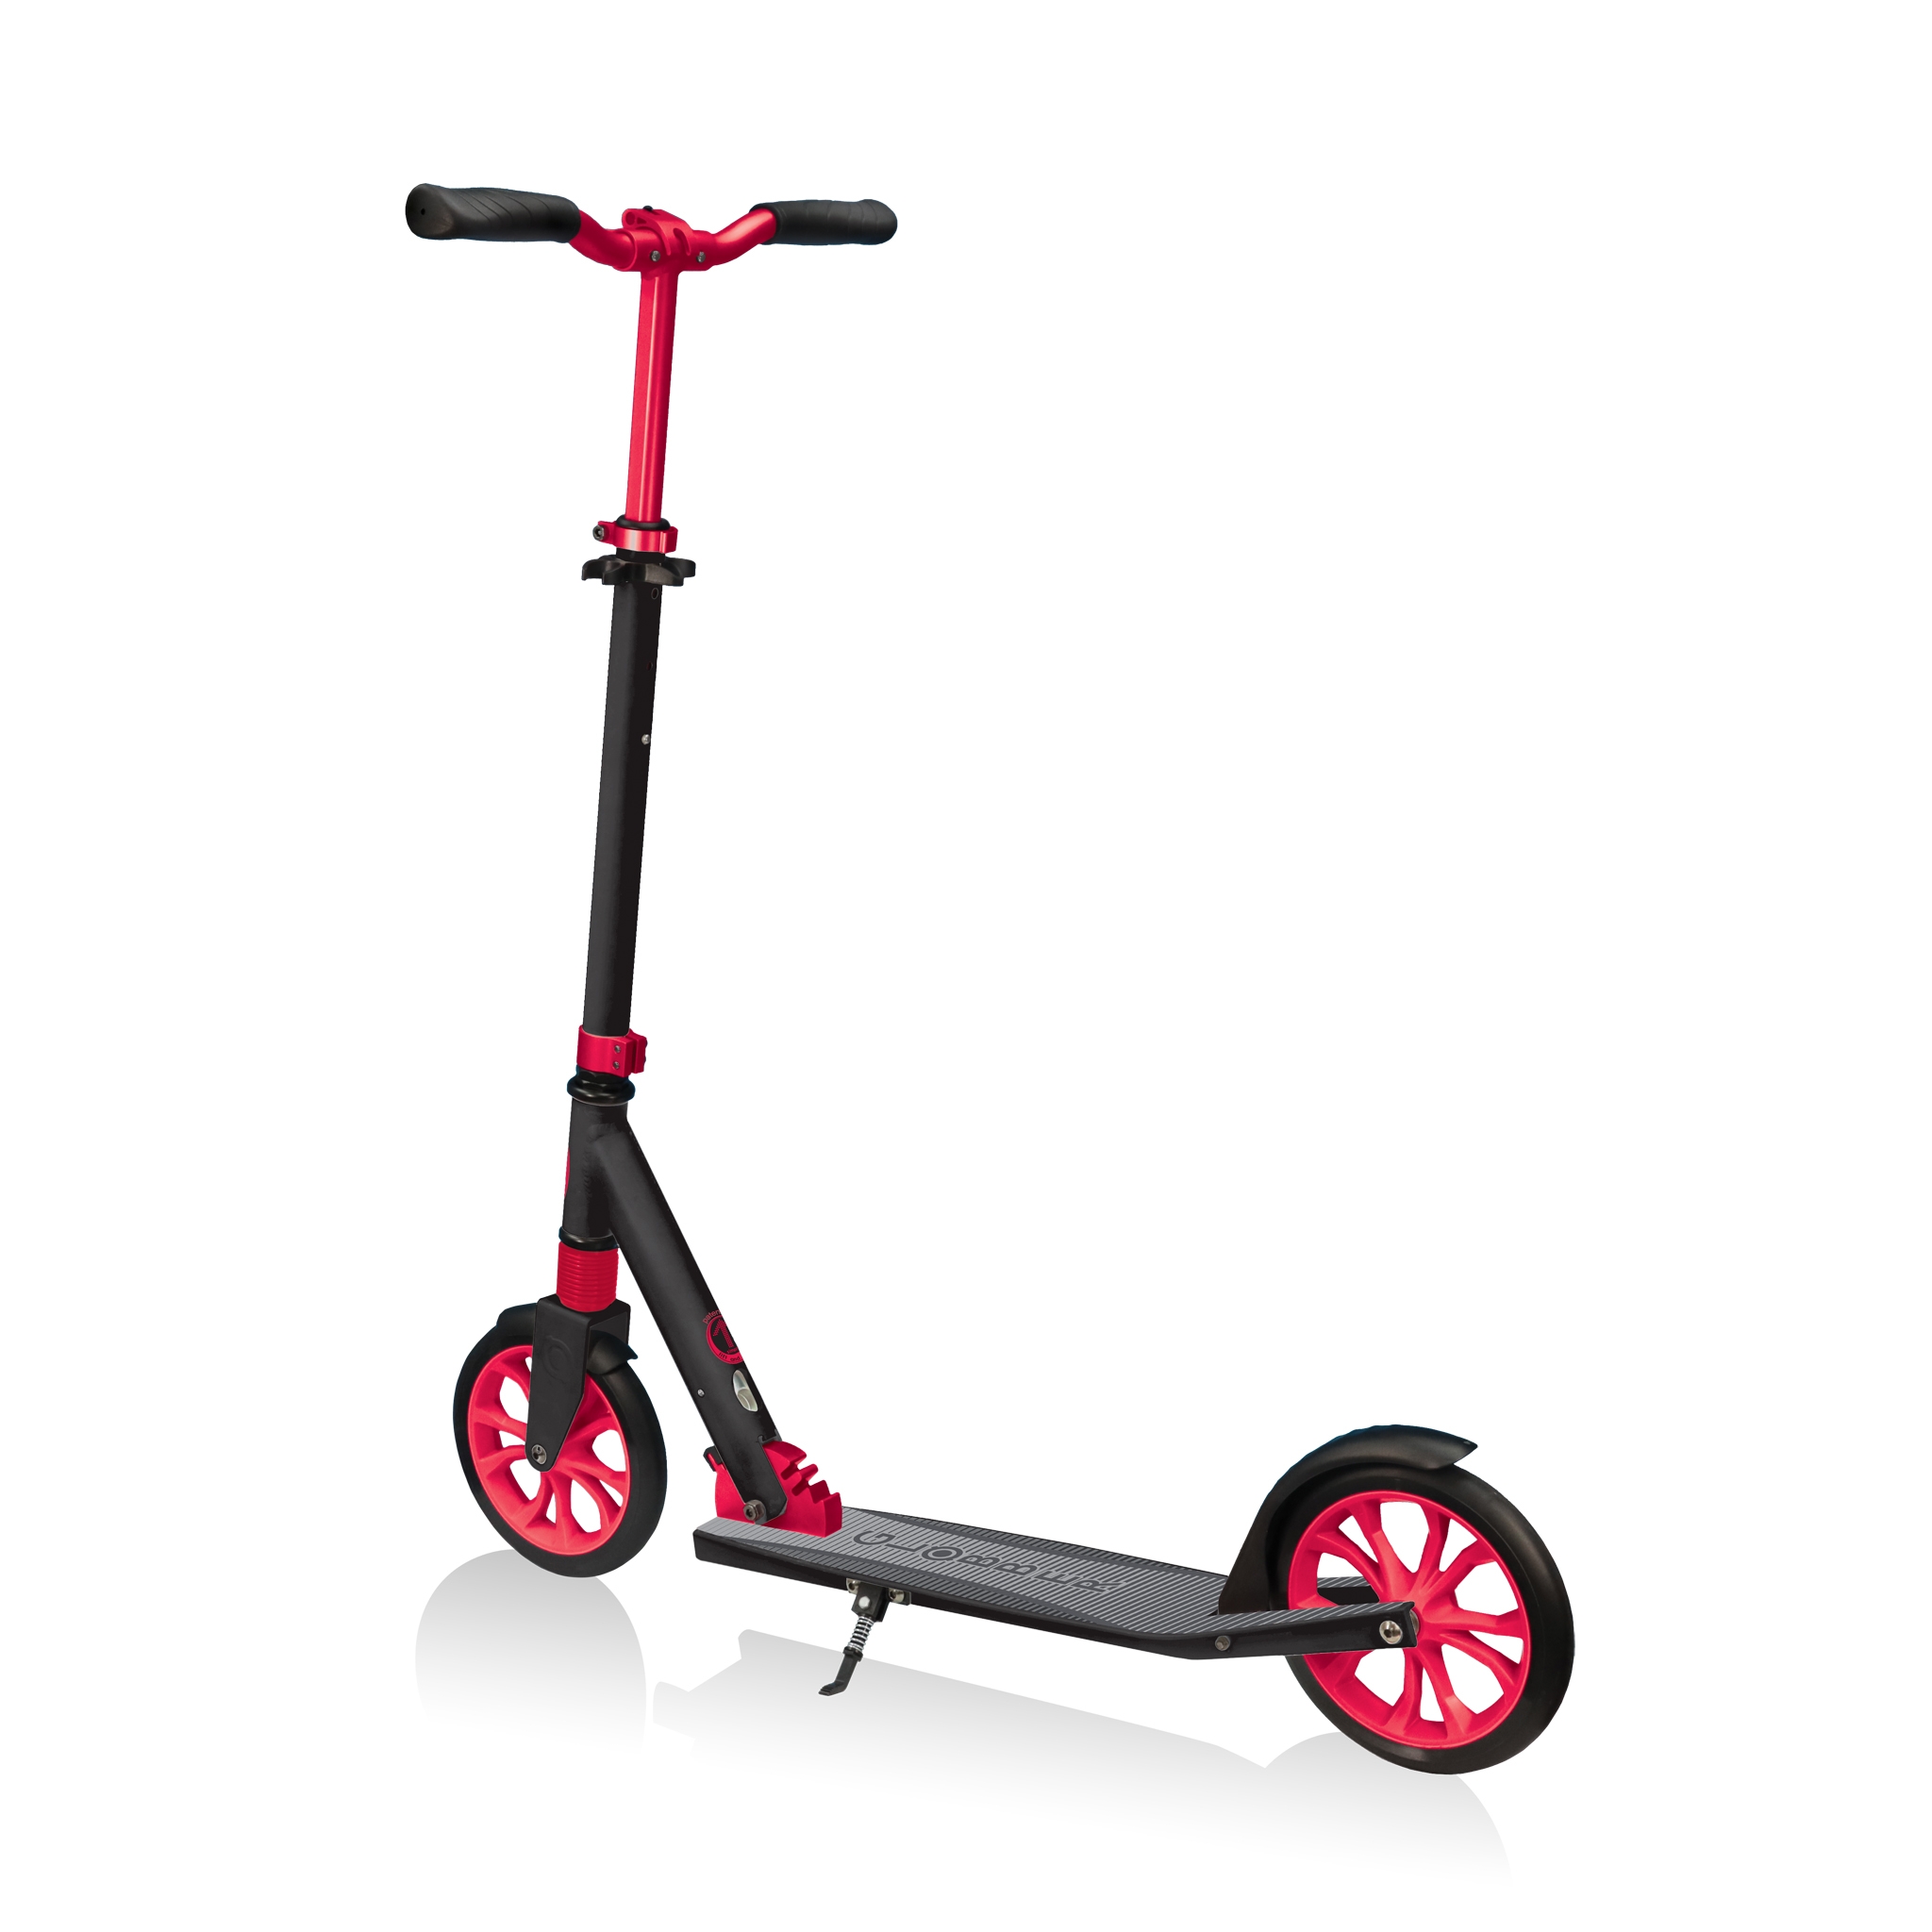 Globber-NL-205-big-wheel-scooter-for-kids-with-front-suspension 4